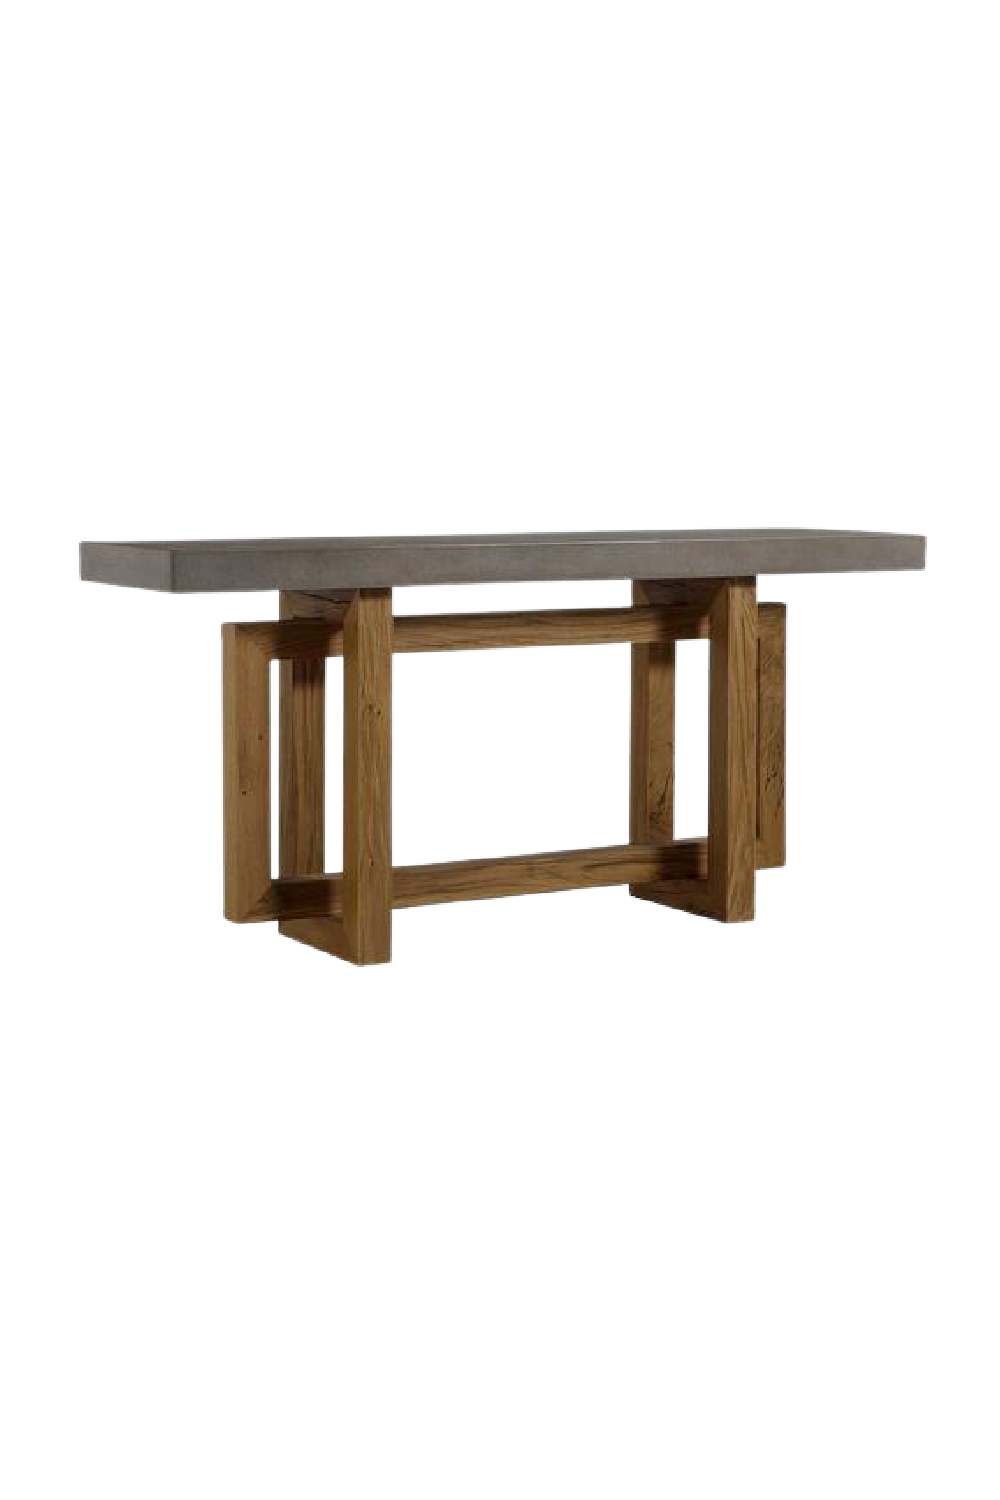 Polished Concrete Top Wooden Console Table S | Andrew | OROA.com